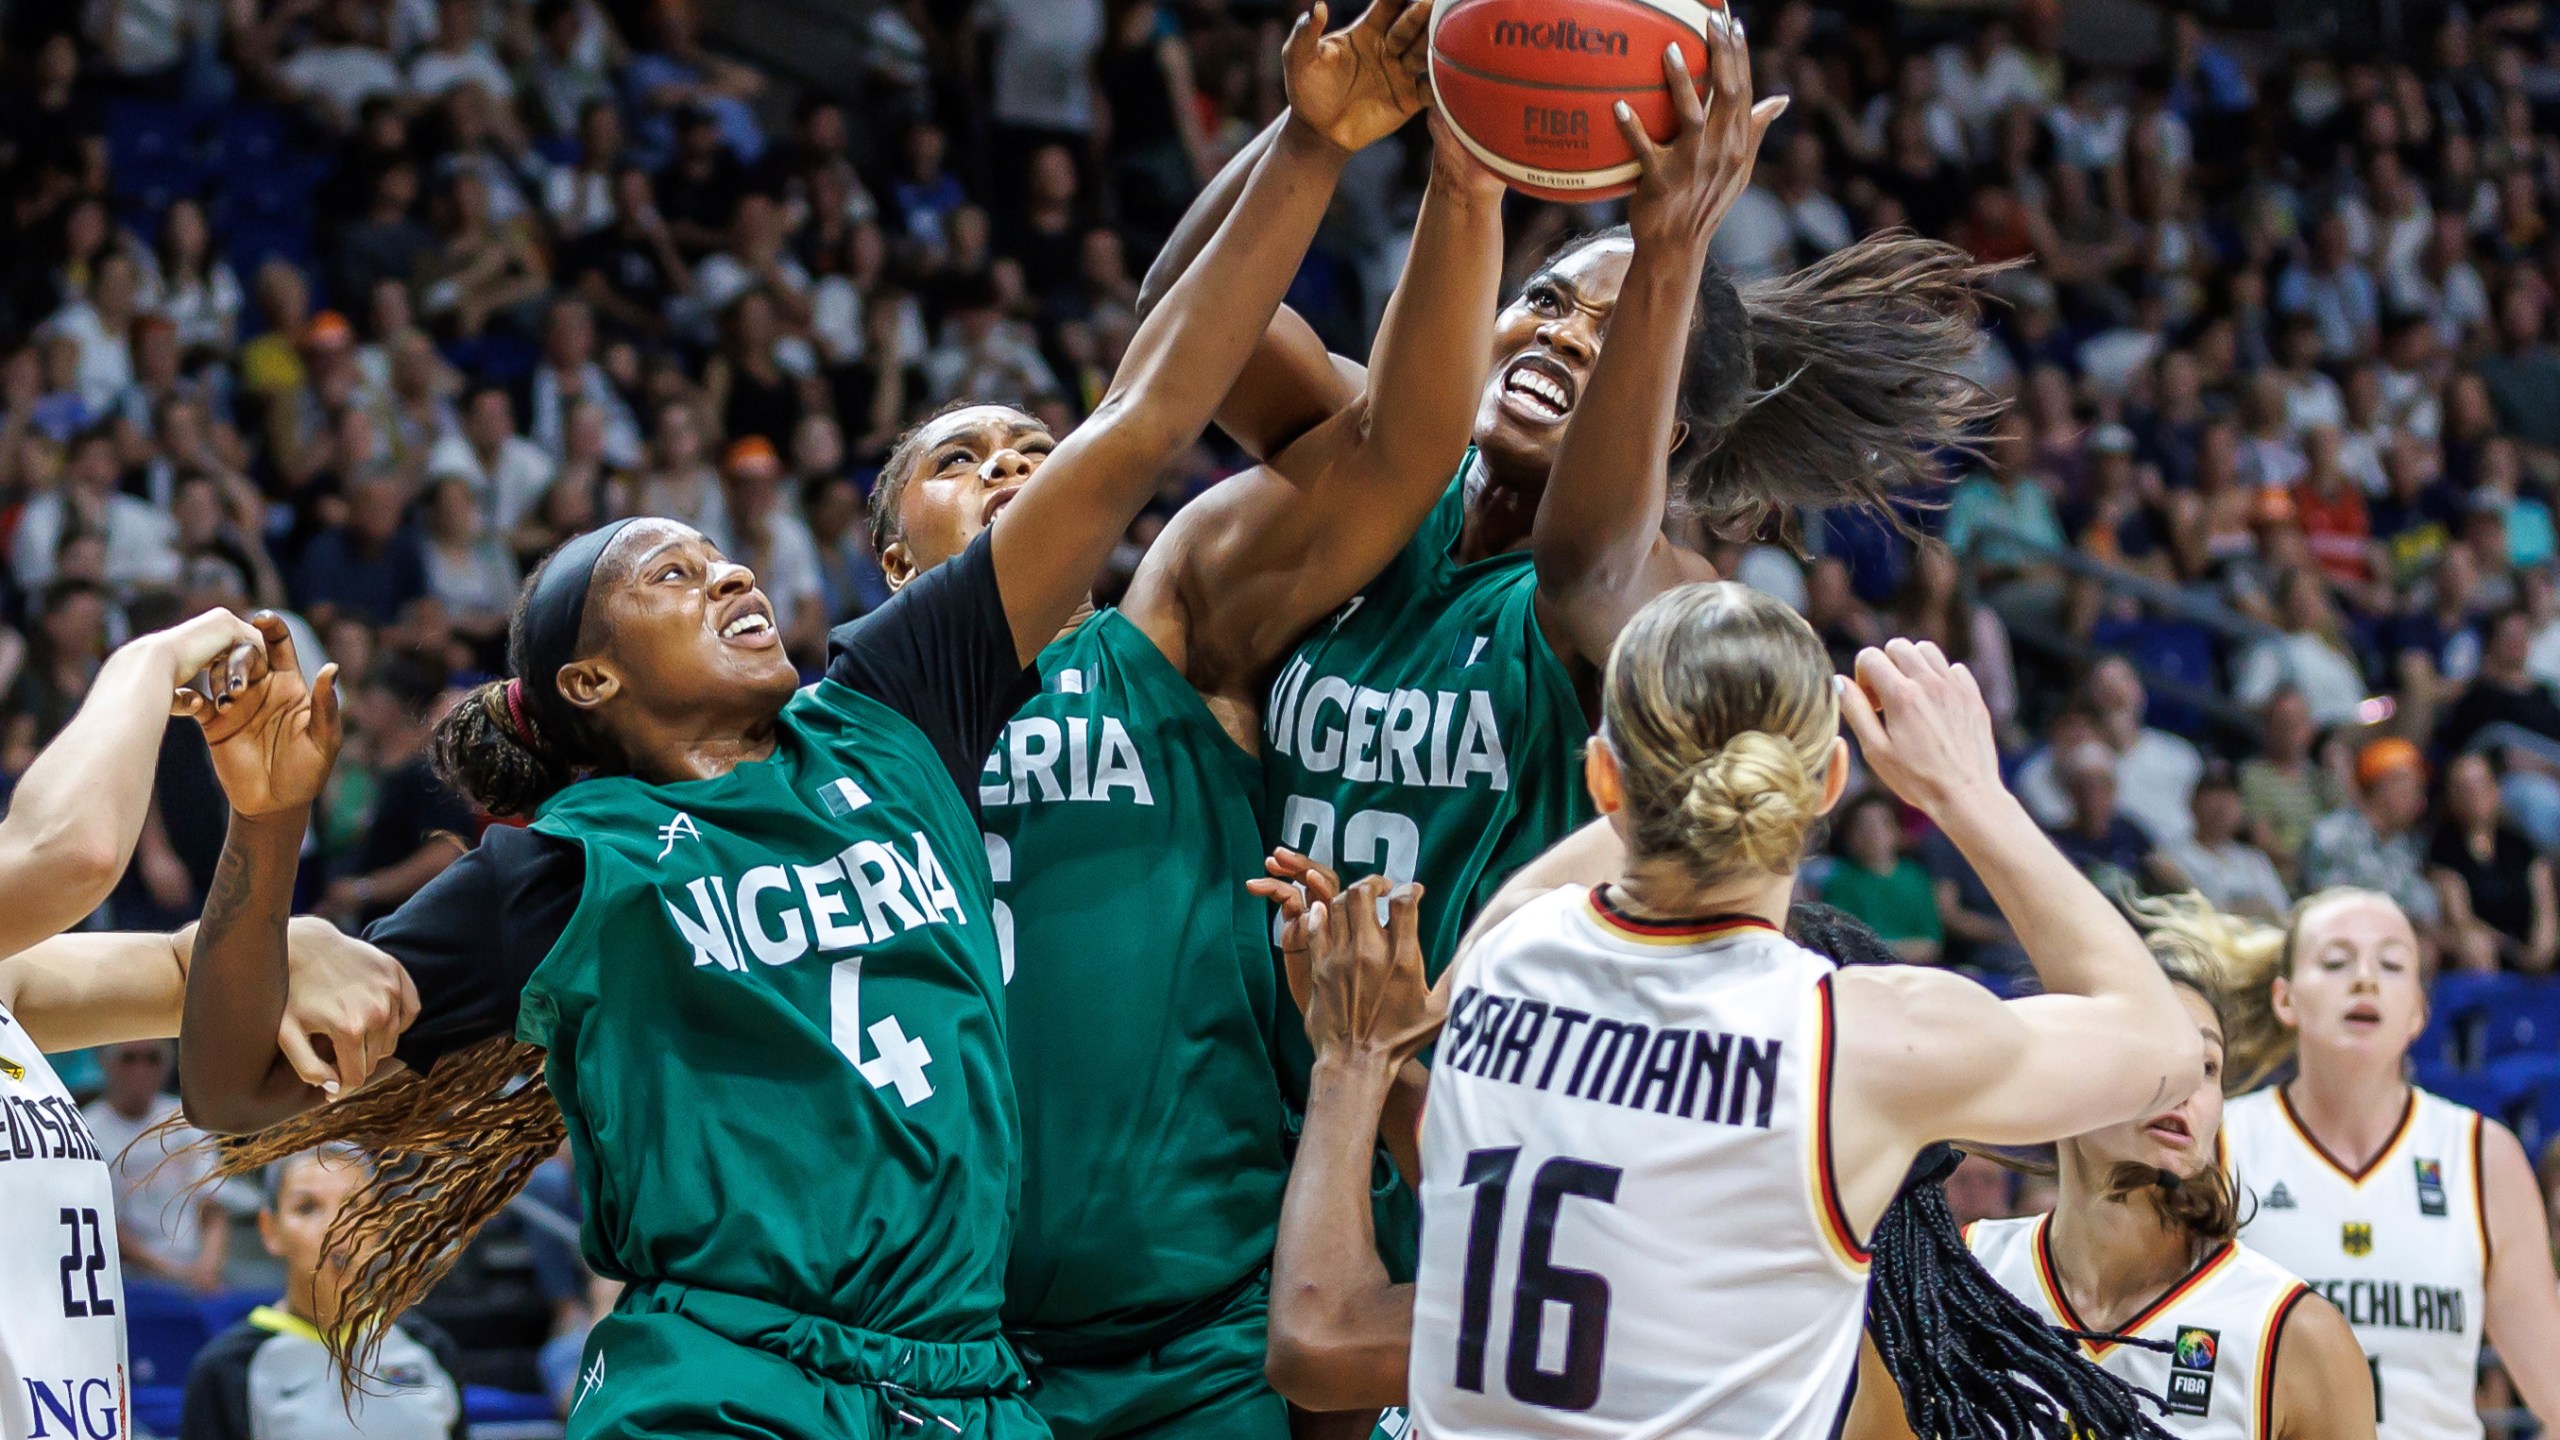 Germany's Alina Hartmann, right, tries to get the ball against, from right, Blessing Ejiofor, Lauren Ebo and Elizabeth Balogun from Nigeria during the Women International Basketball match between Germany and Nigeria at the Uber Arena in Berlin, Friday July 19, 2024. (Andreas Gora/dpa via AP)